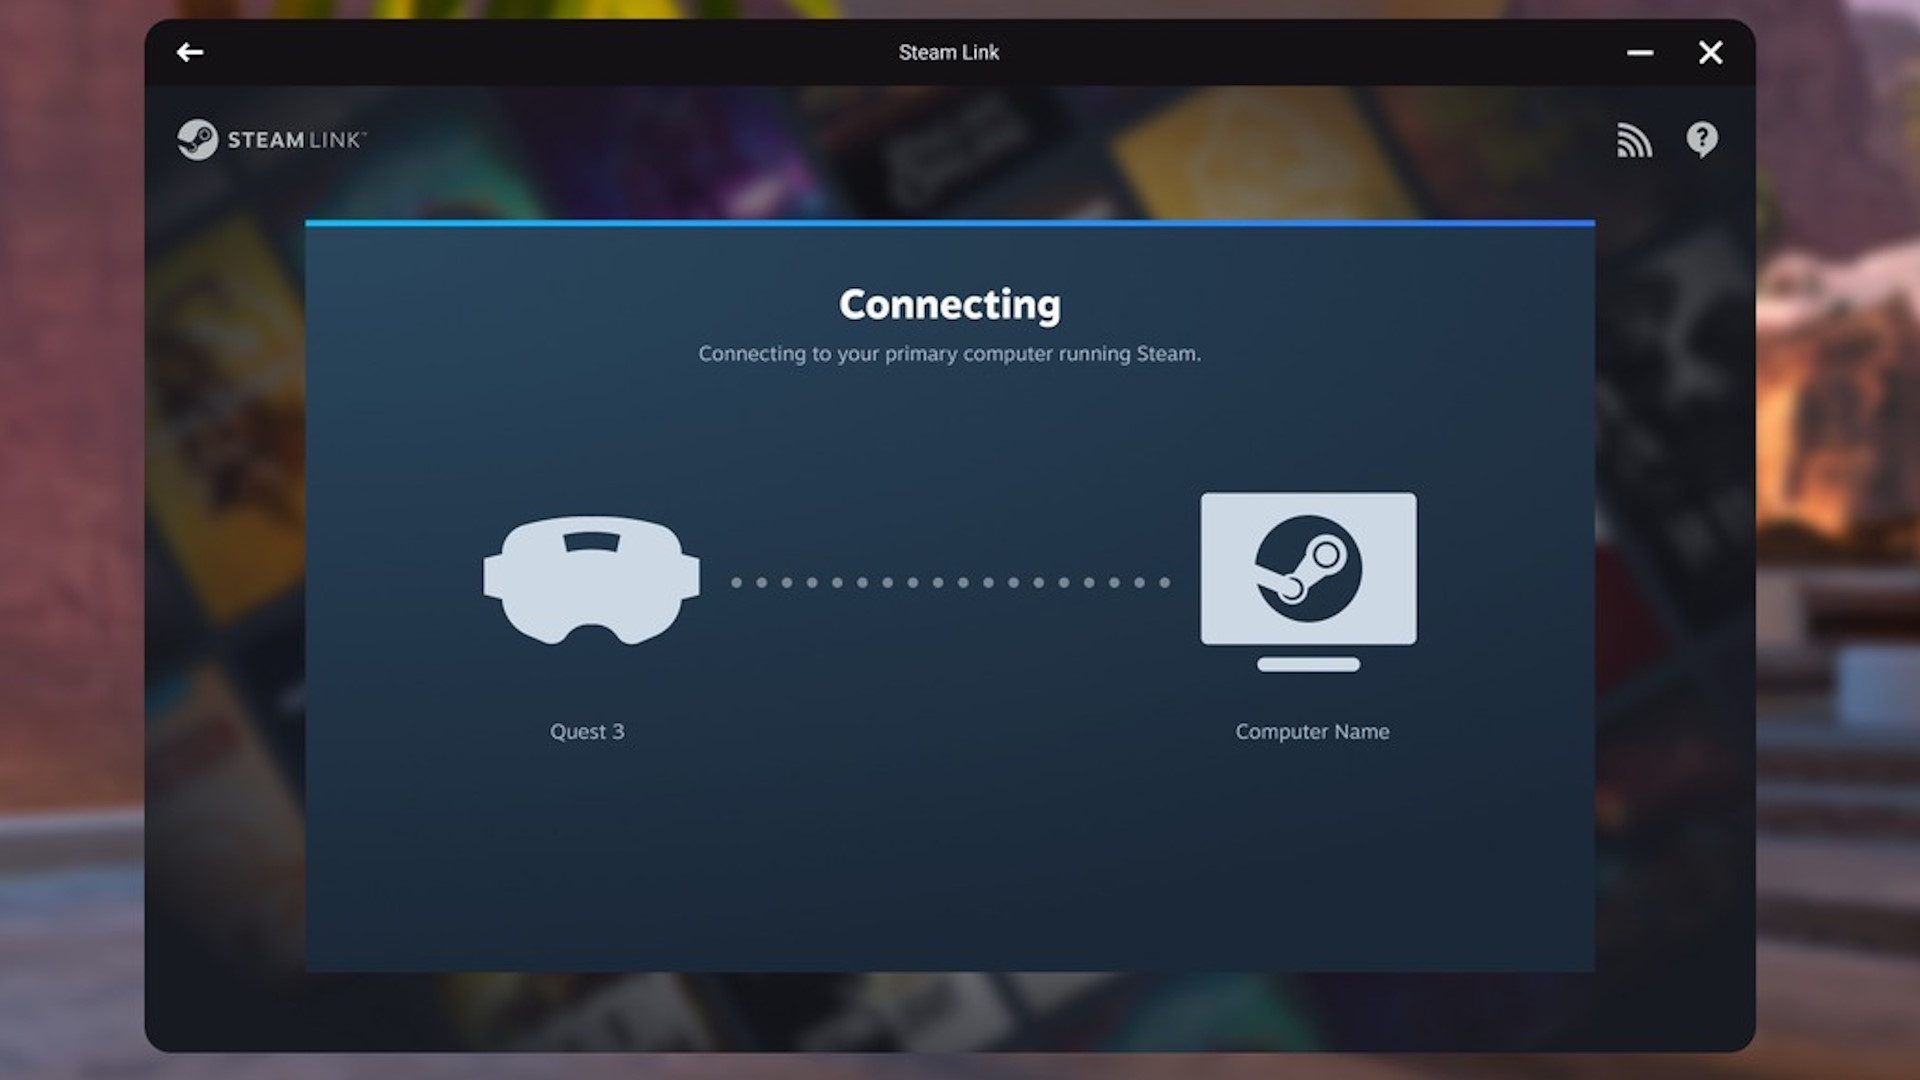 Native Steam Link support for Meta Quest headsets promises to simplify life for VR gamers